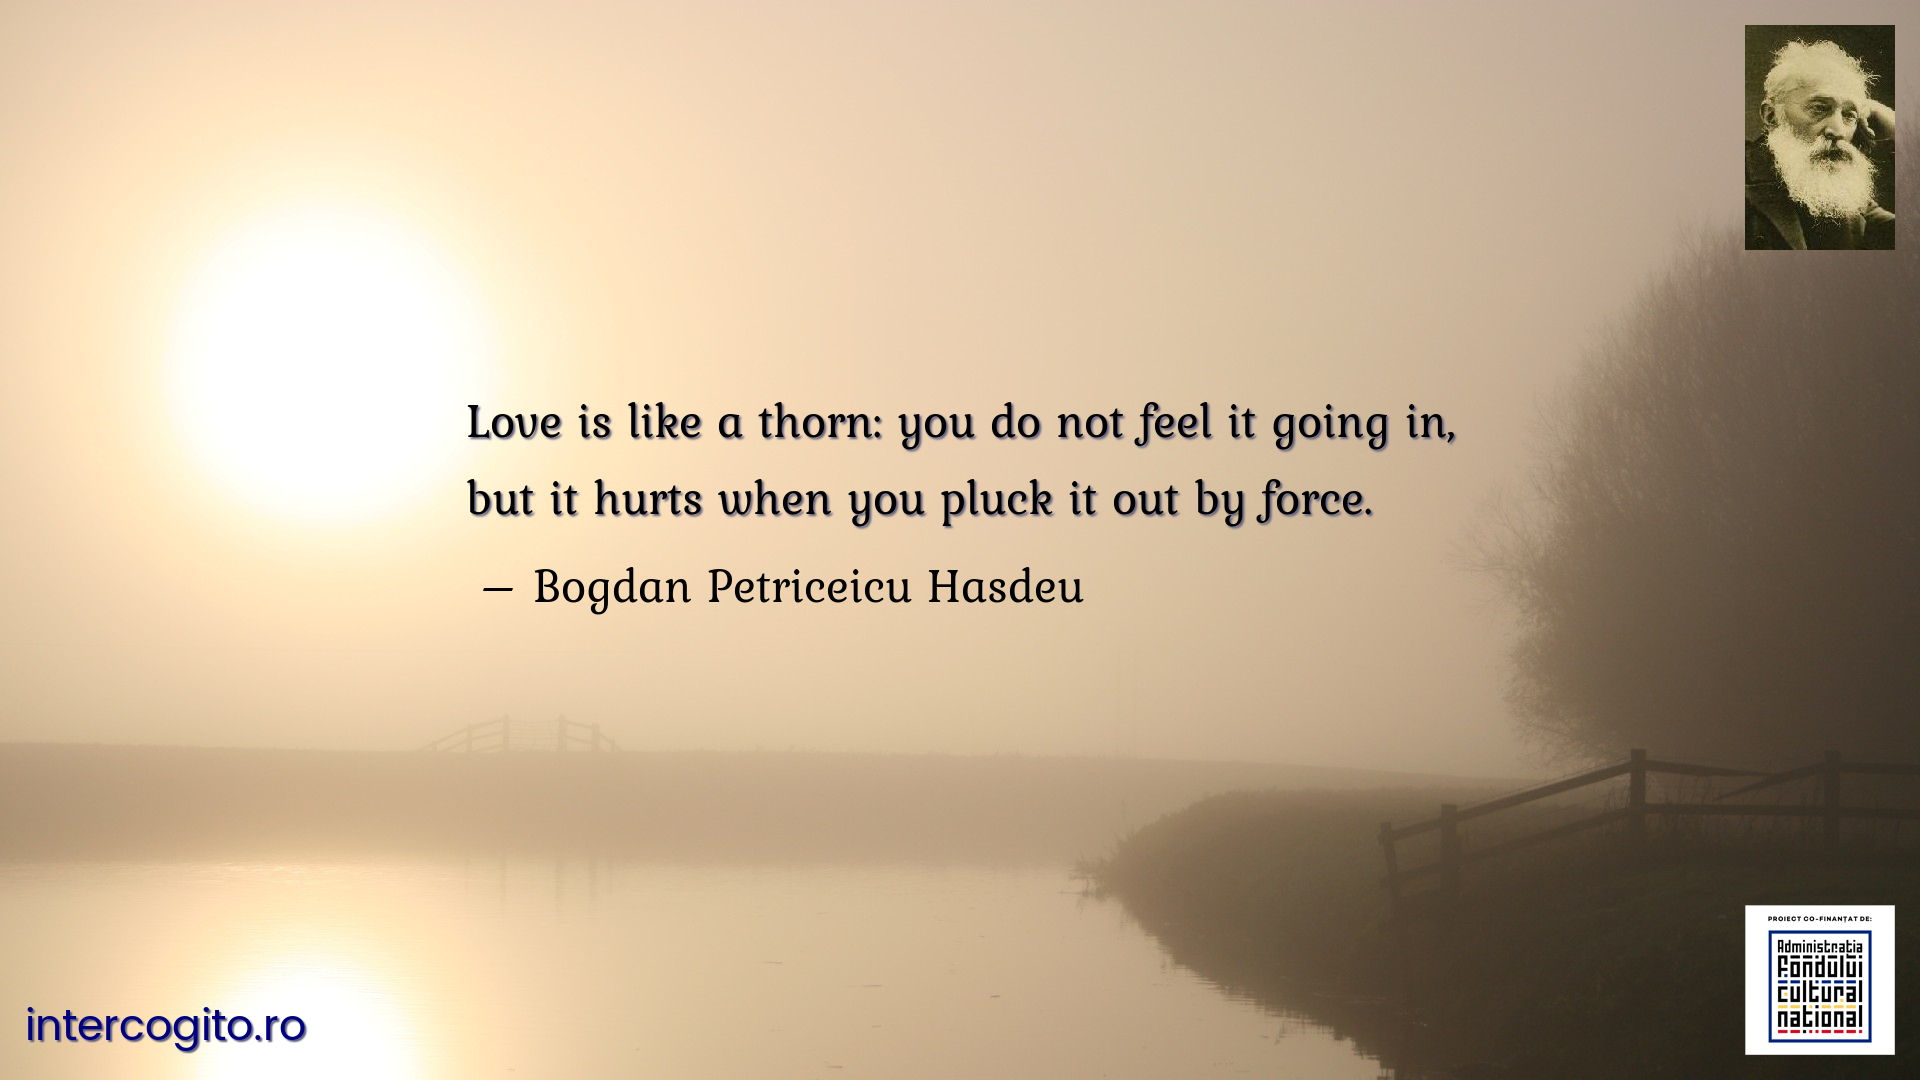 Love is like a thorn: you do not feel it going in, but it hurts when you pluck it out by force.